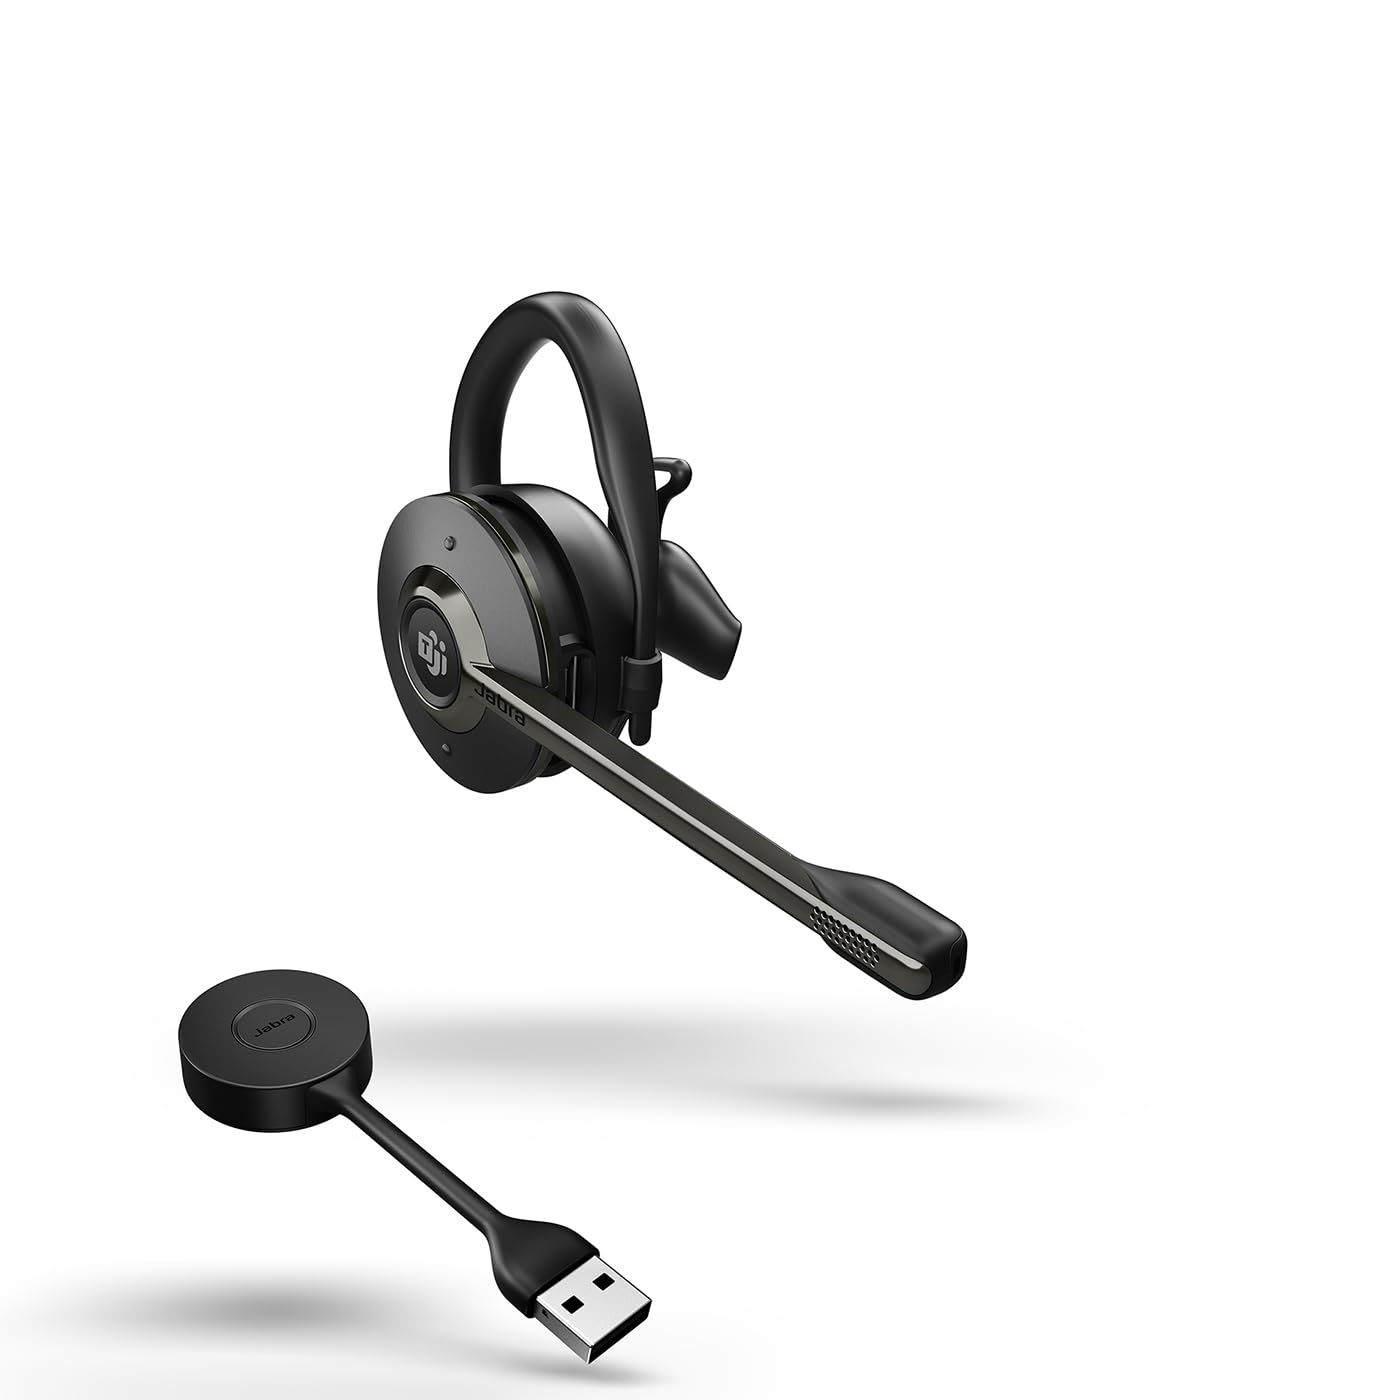 Re-pair the headset with the device
Contact Jabra support for further assistance